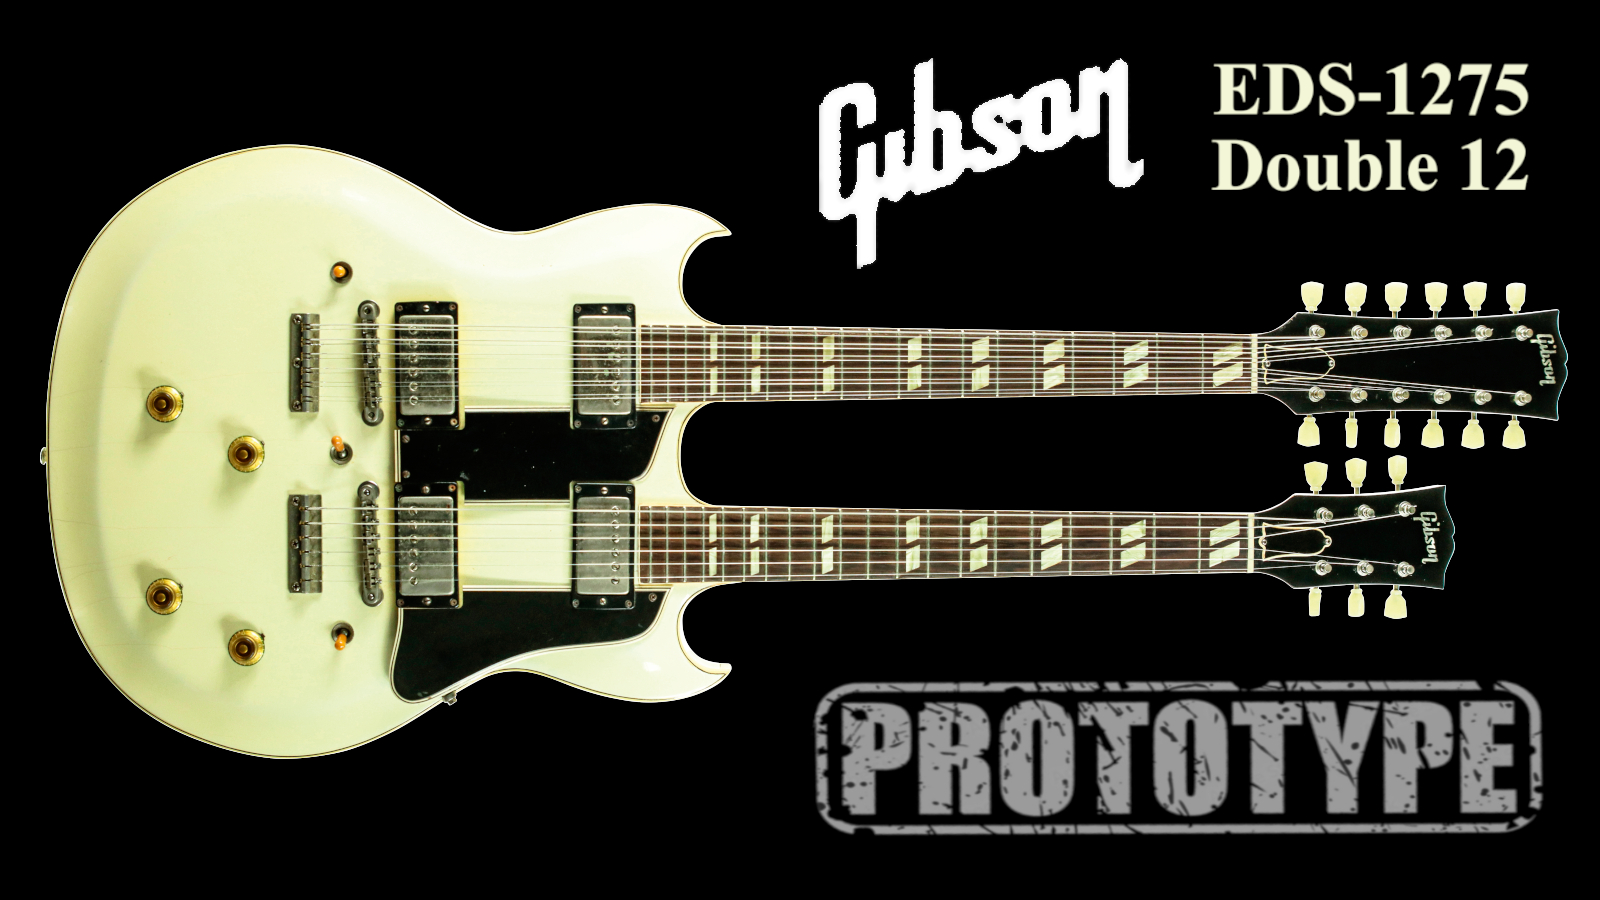 A Favorite of Jimmy Page, Don Felder and Slash, the Gibson EDS 